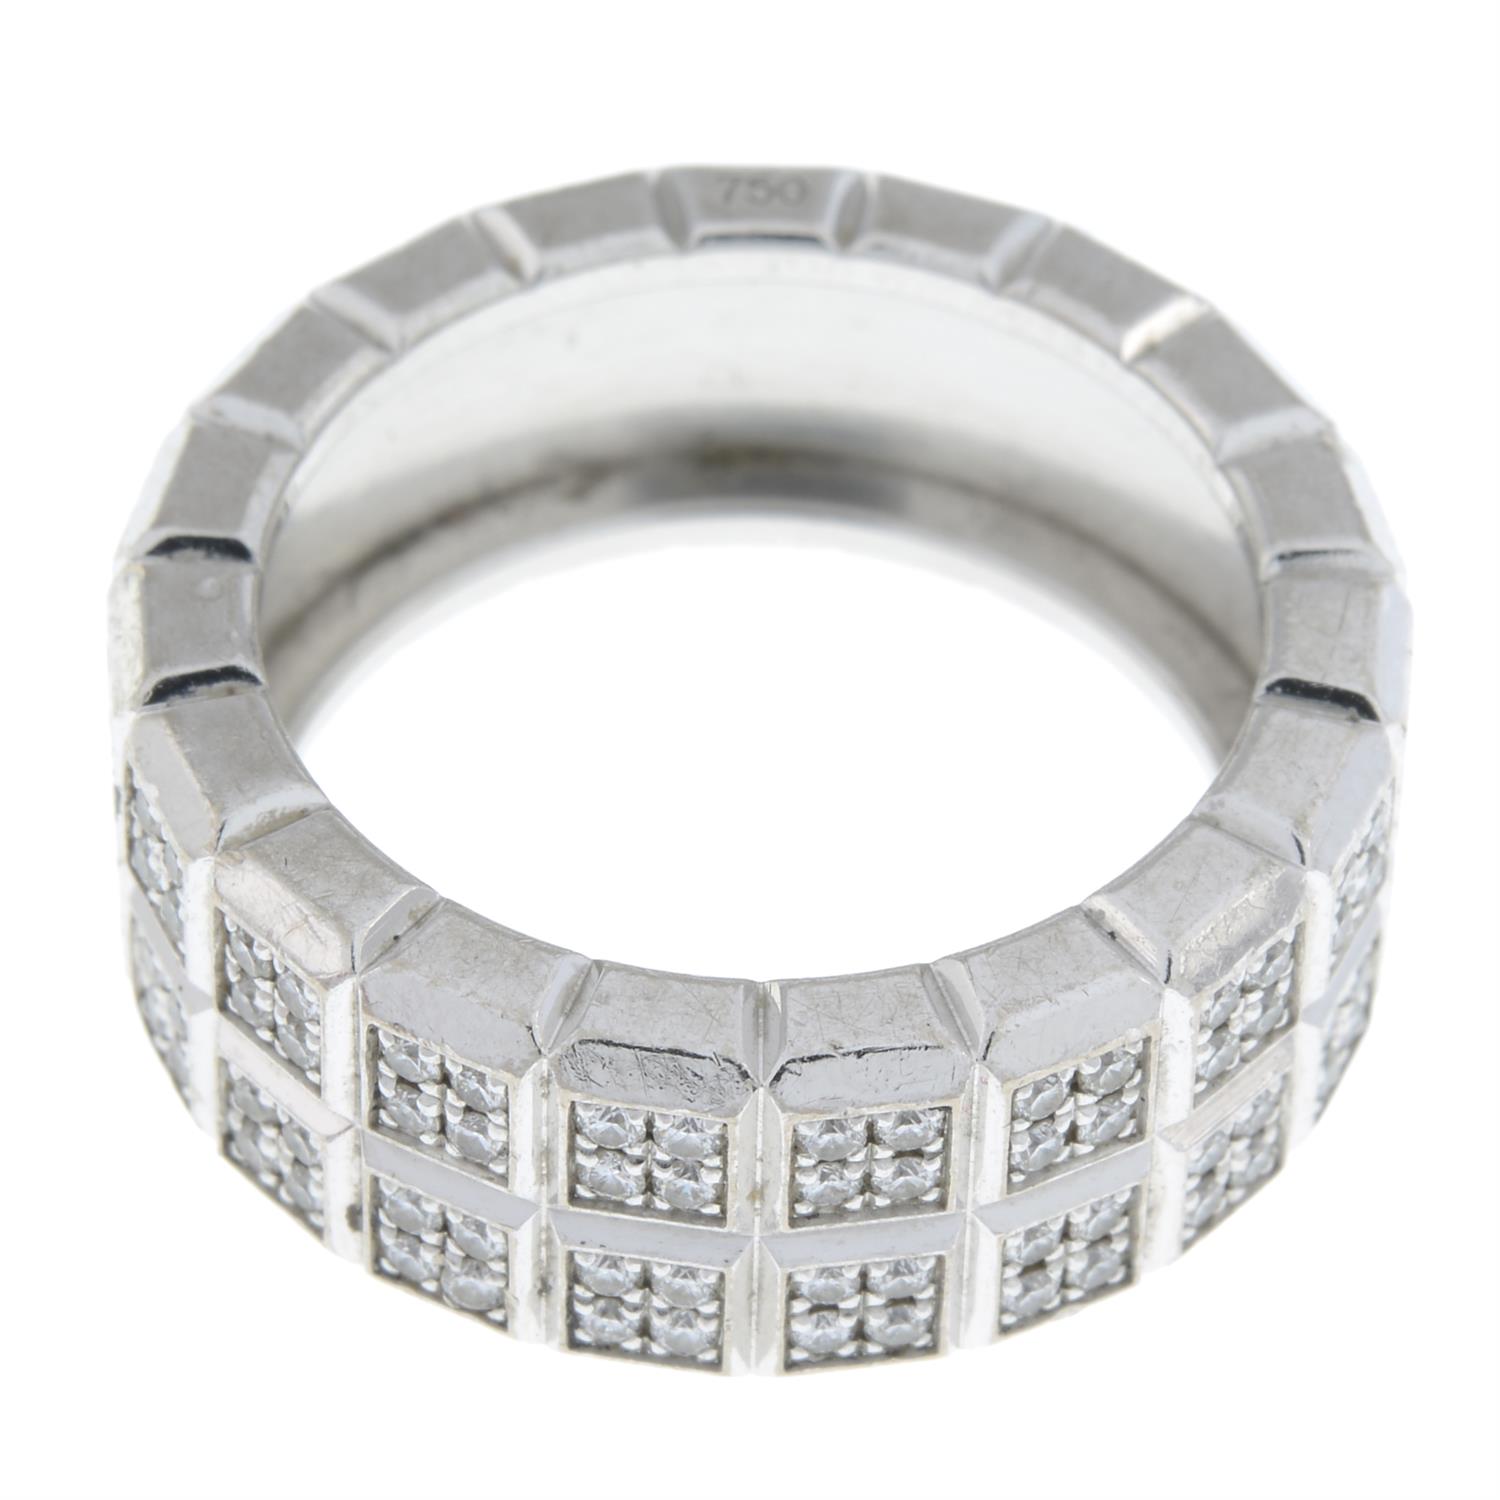 18ct gold diamond 'Ice Cube' ring, by Chopard - Image 4 of 5